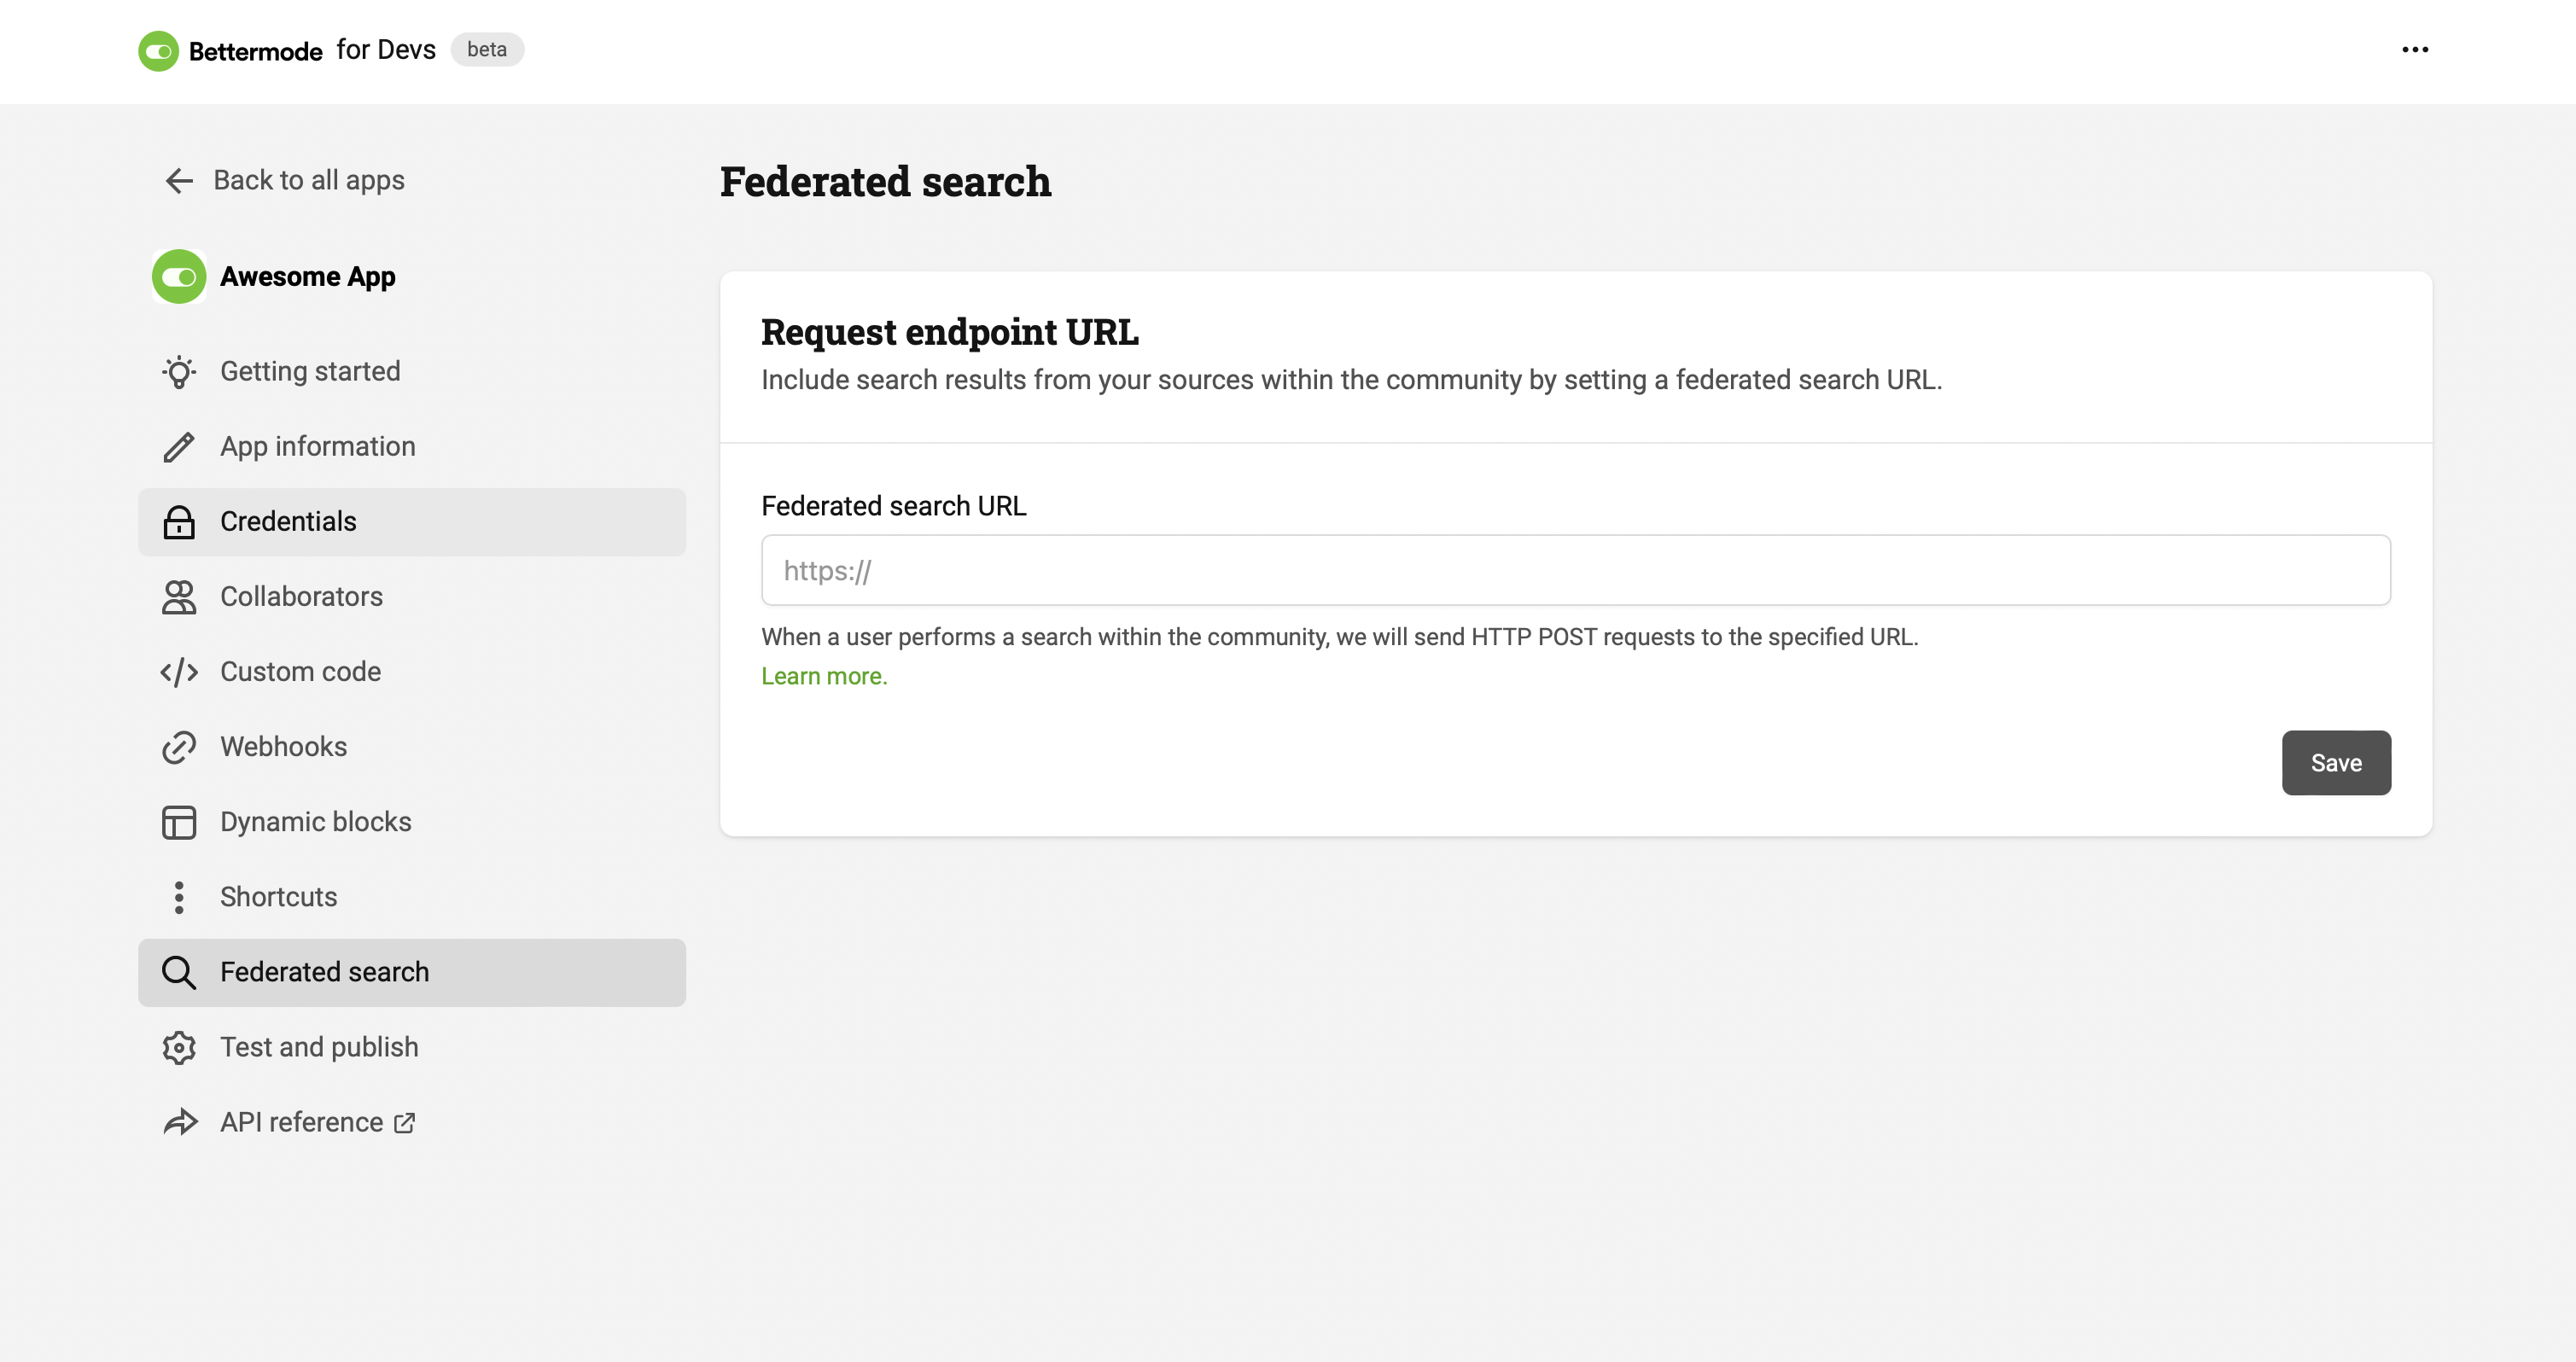 Federated search